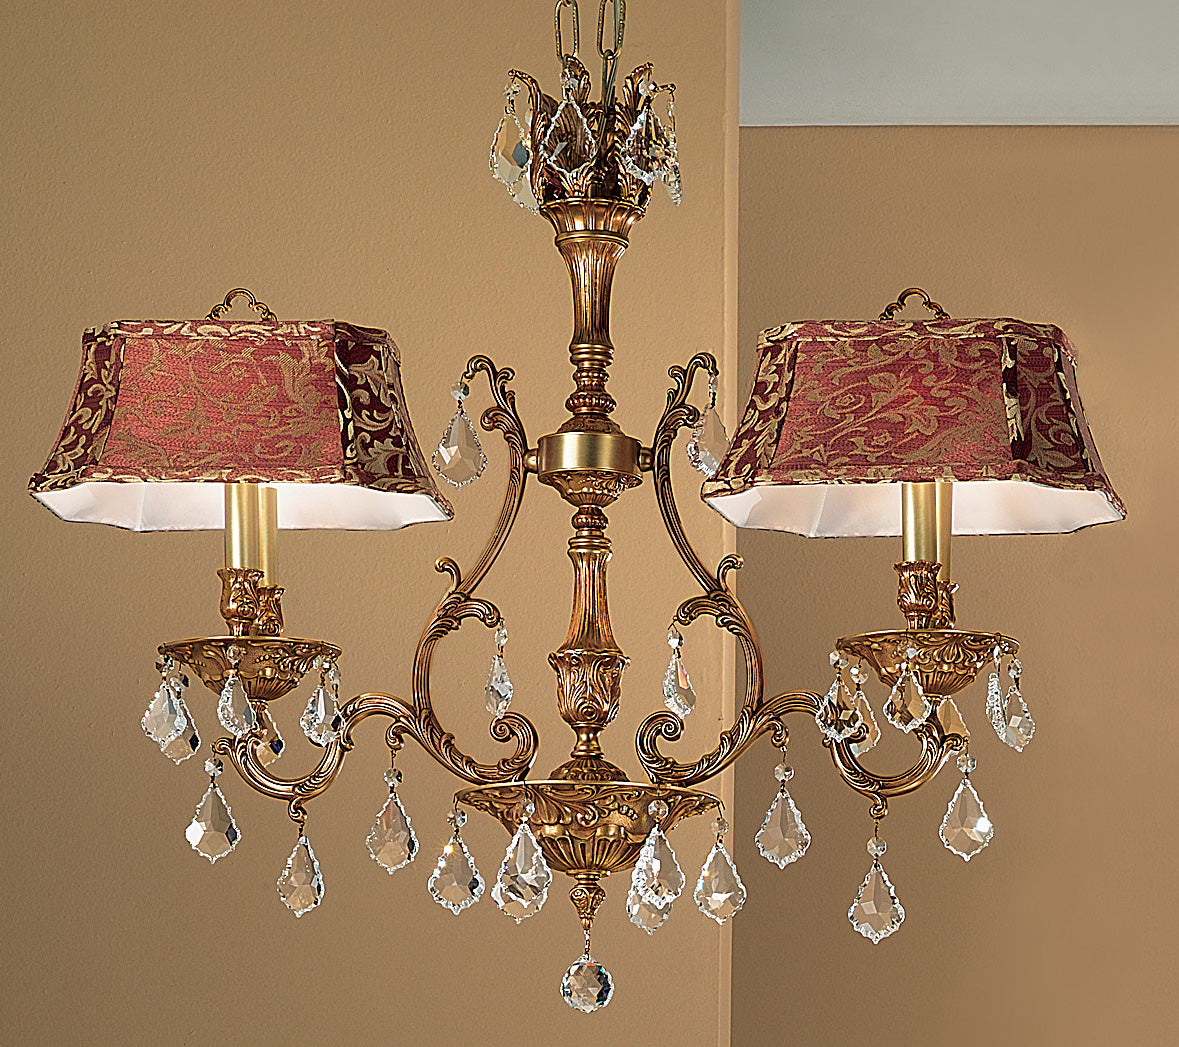 Classic Lighting 57360 FG S Majestic Crystal Island Light in French Gold (Imported from Spain)